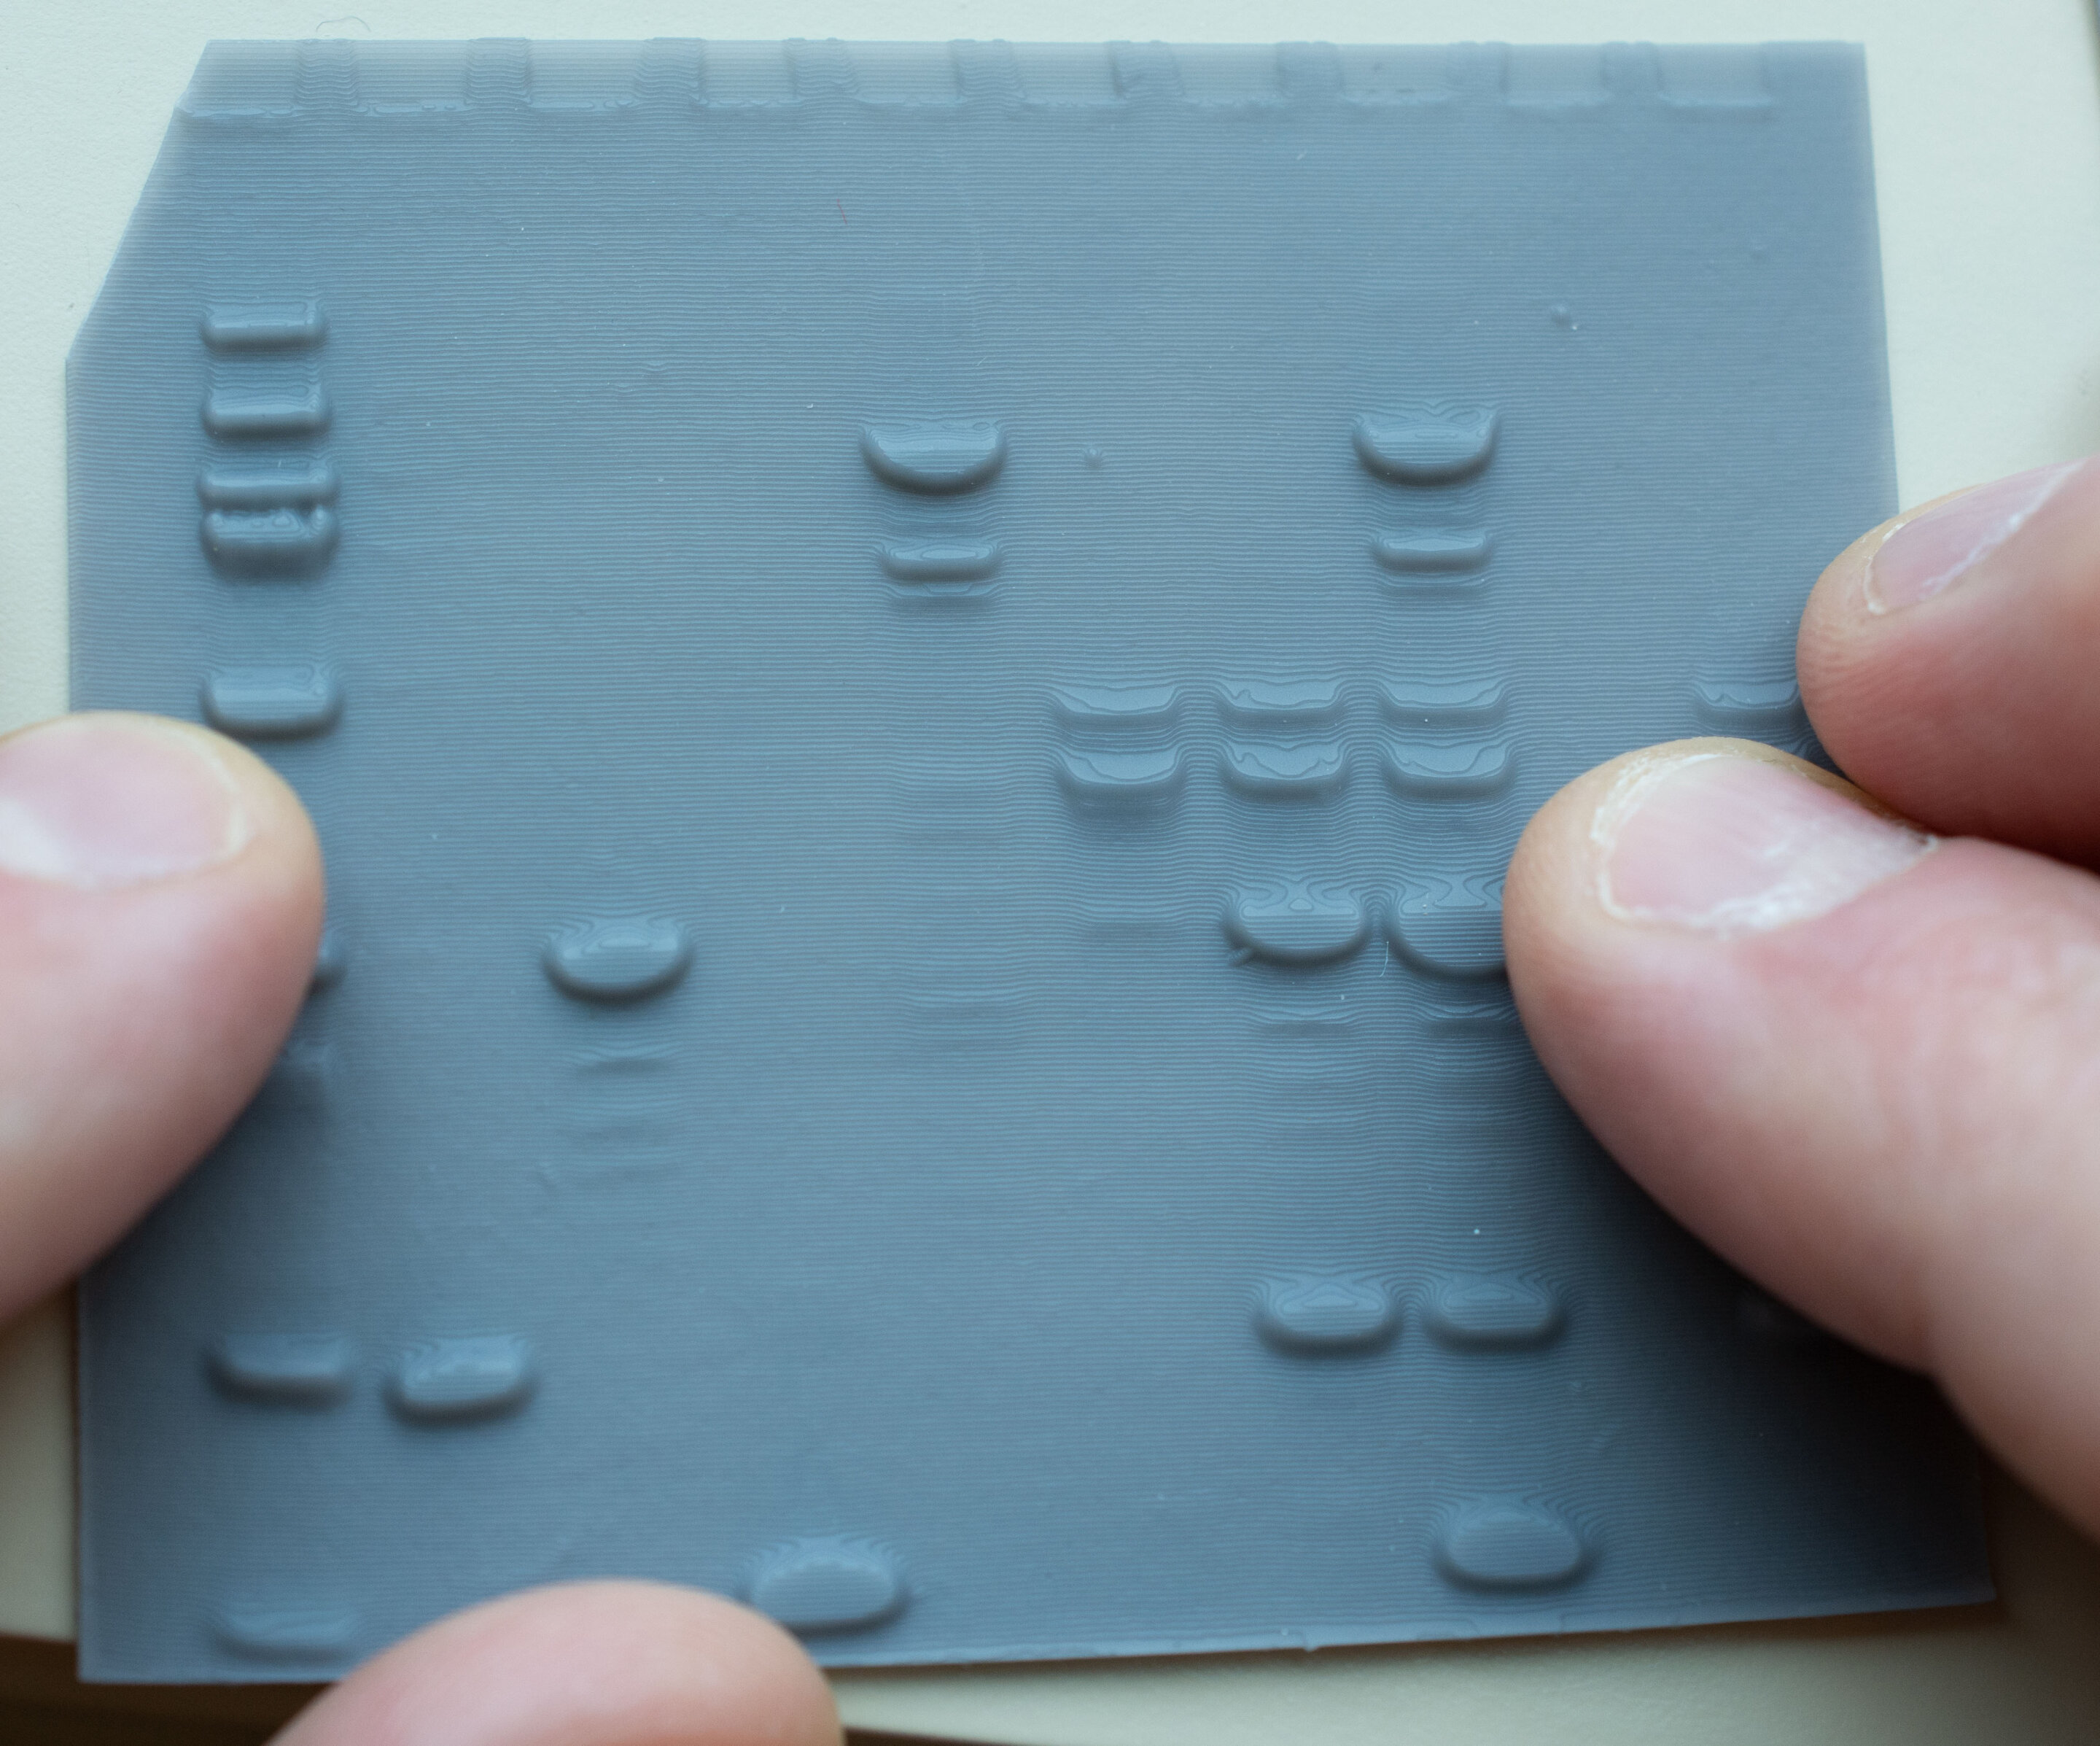 New study combines lithophane and 3D printing to enable individuals to ‘see’ data regardless of level of eyesight